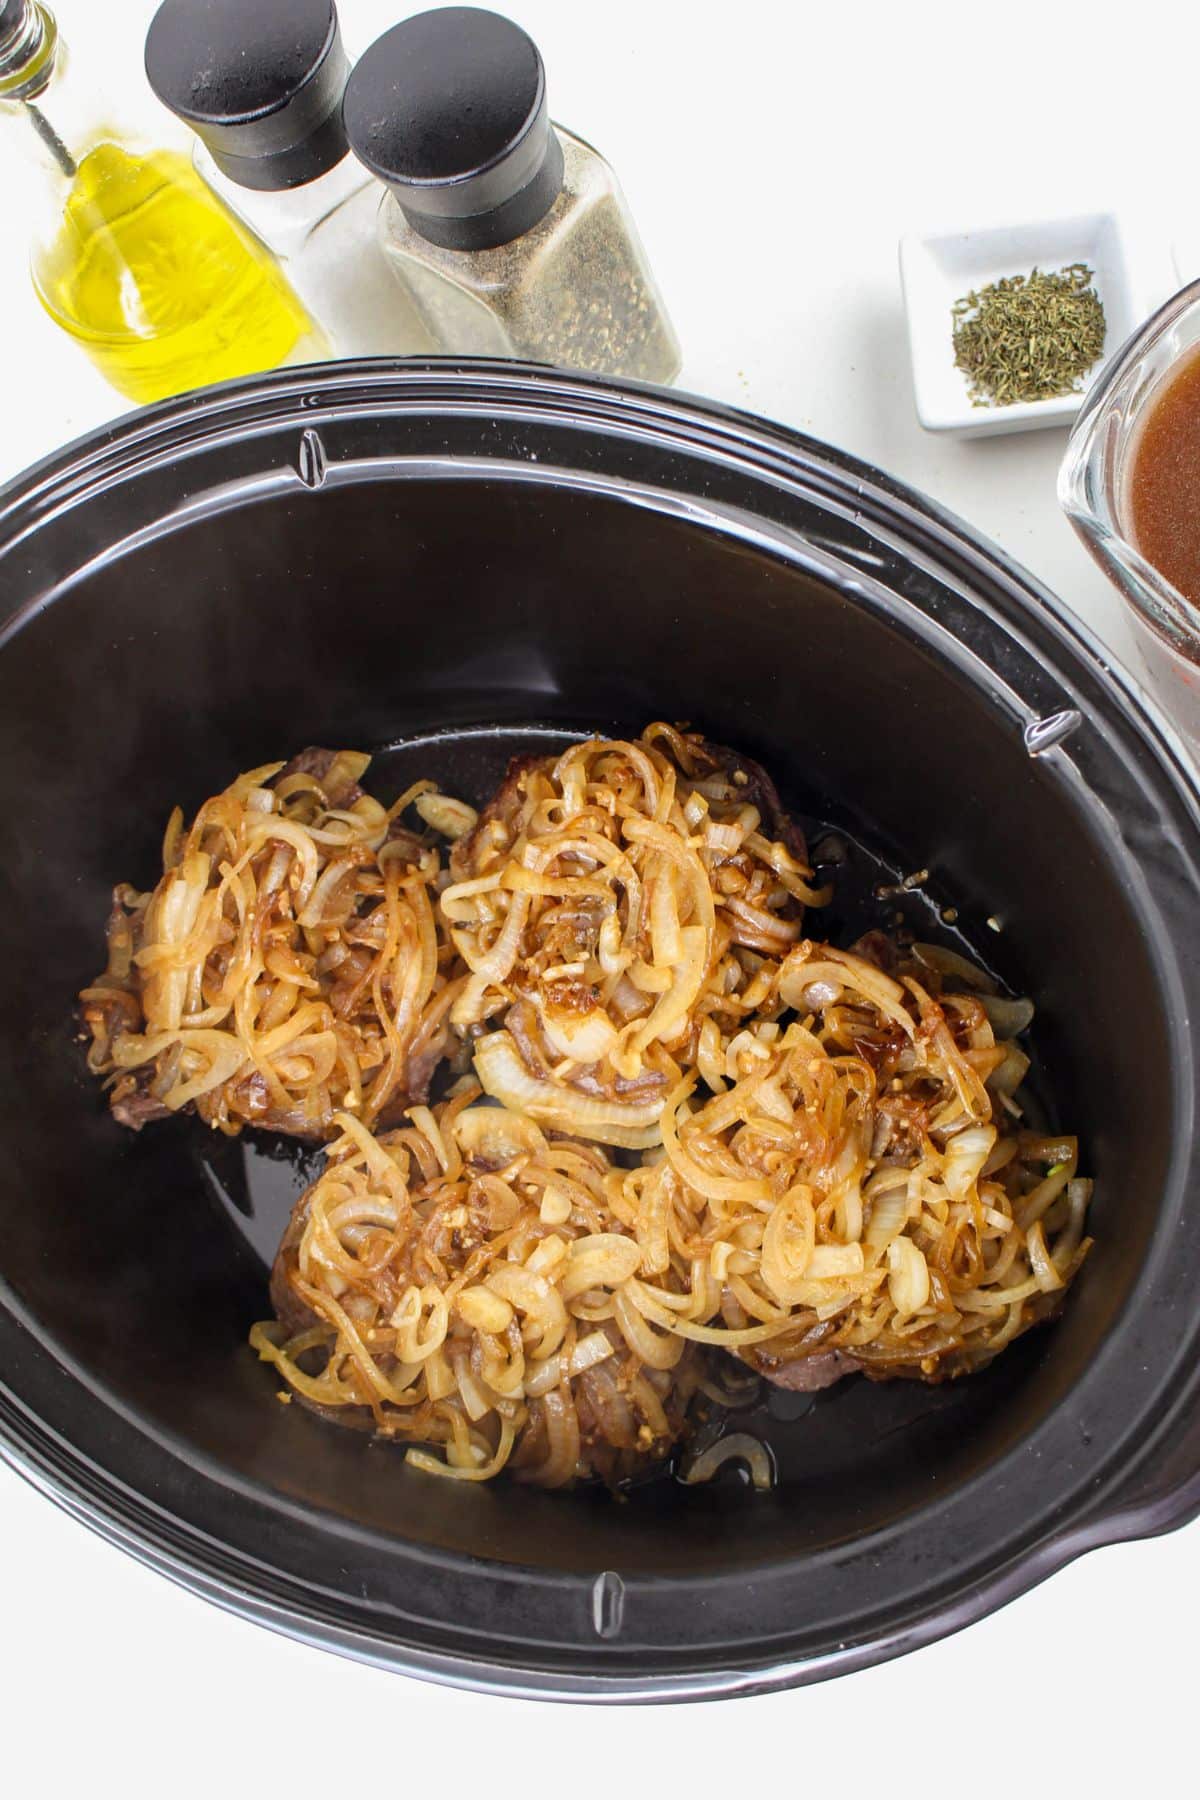 caramelized onions being putting on top of steak in a slow cooker.